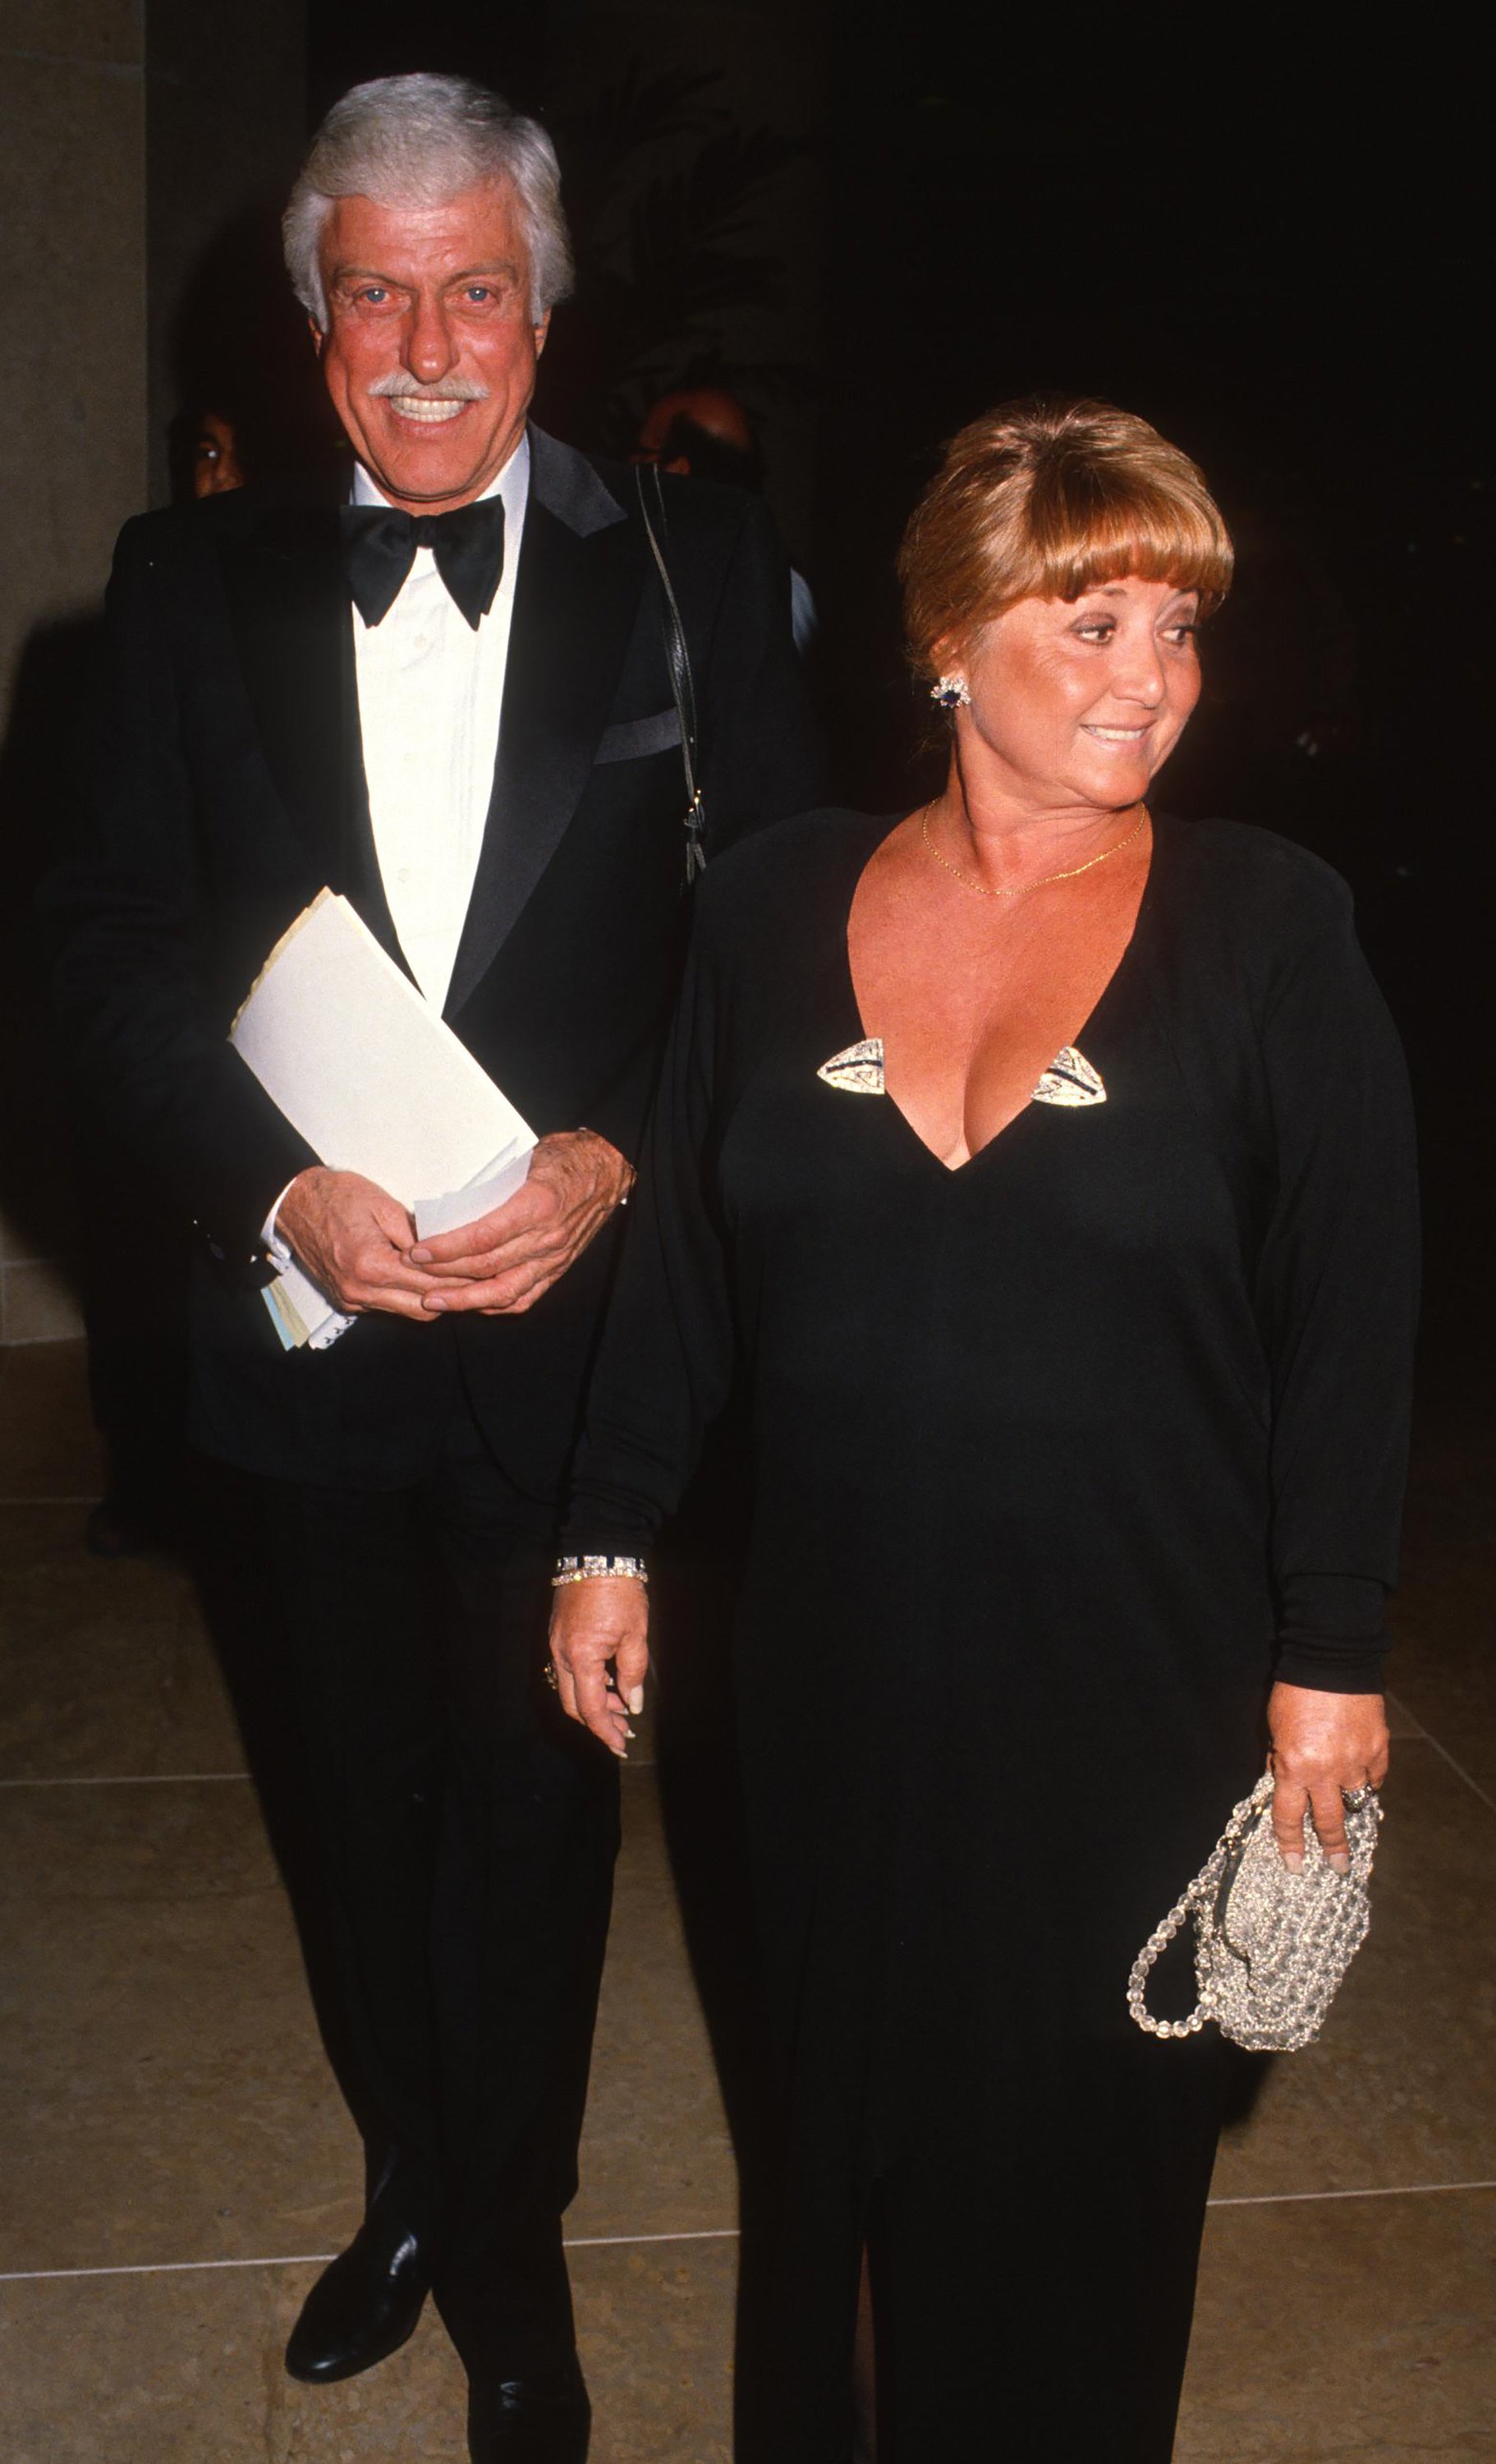 Dick Van Dyke and Michelle Triola attend Young Musicians Dinner Benefit in Beverly Hills, California on November 2, 1990 | Source: Getty Images